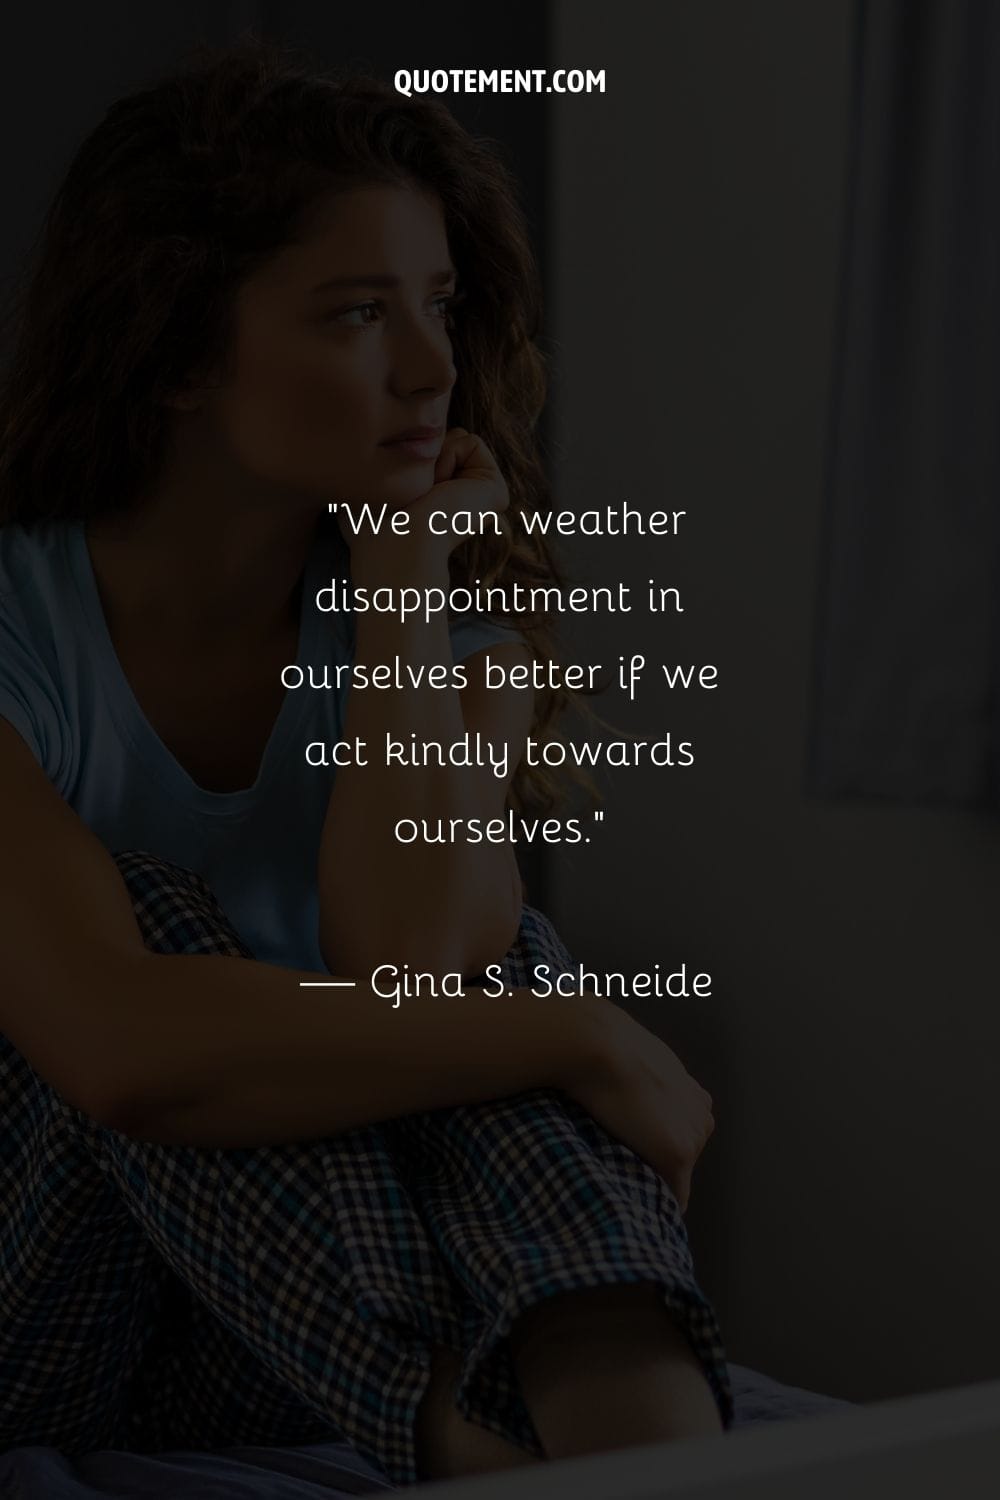 We can weather disappointment in ourselves better if we act kindly towards ourselves